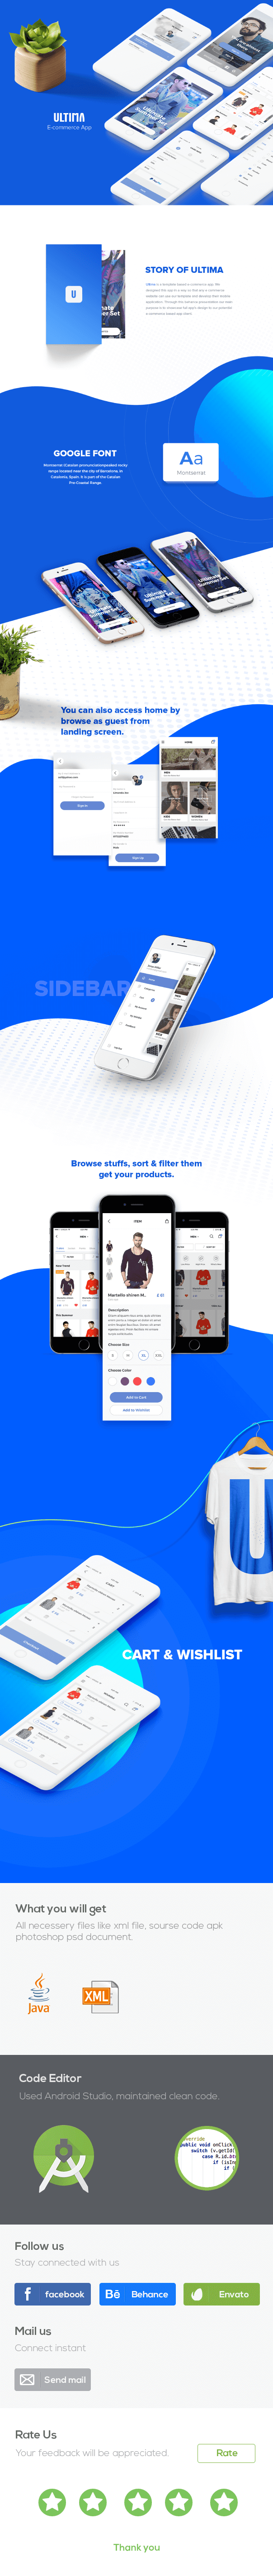 EFashion - Ecommerce Android App Template - 1